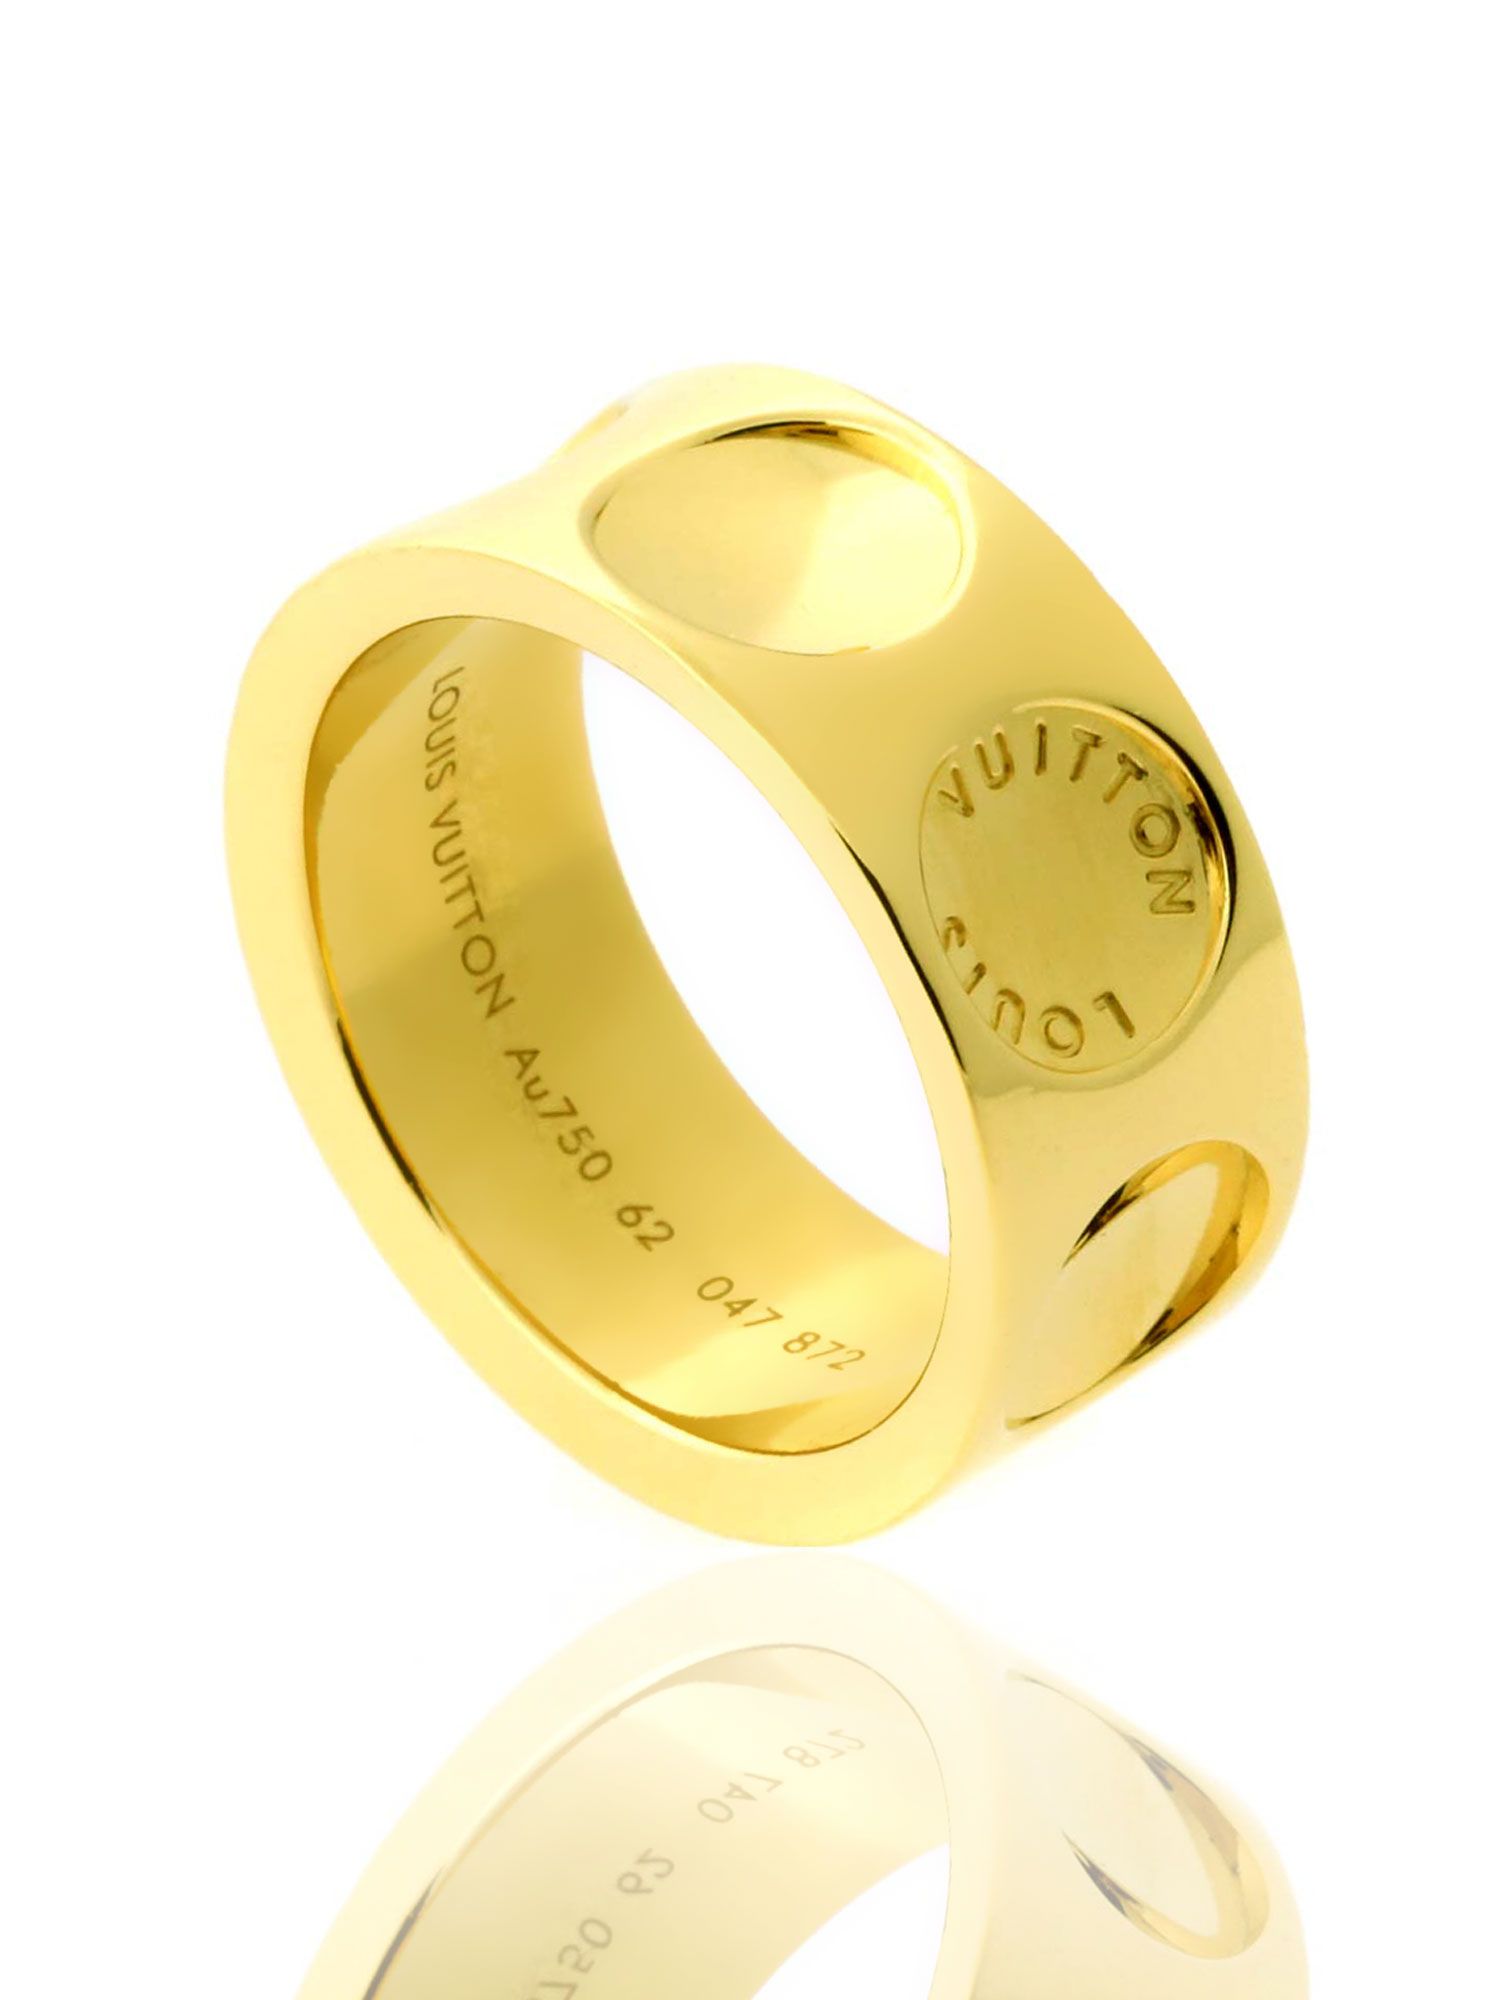 EMPREINTE RING, YELLOW GOLD - Jewelry - Categories